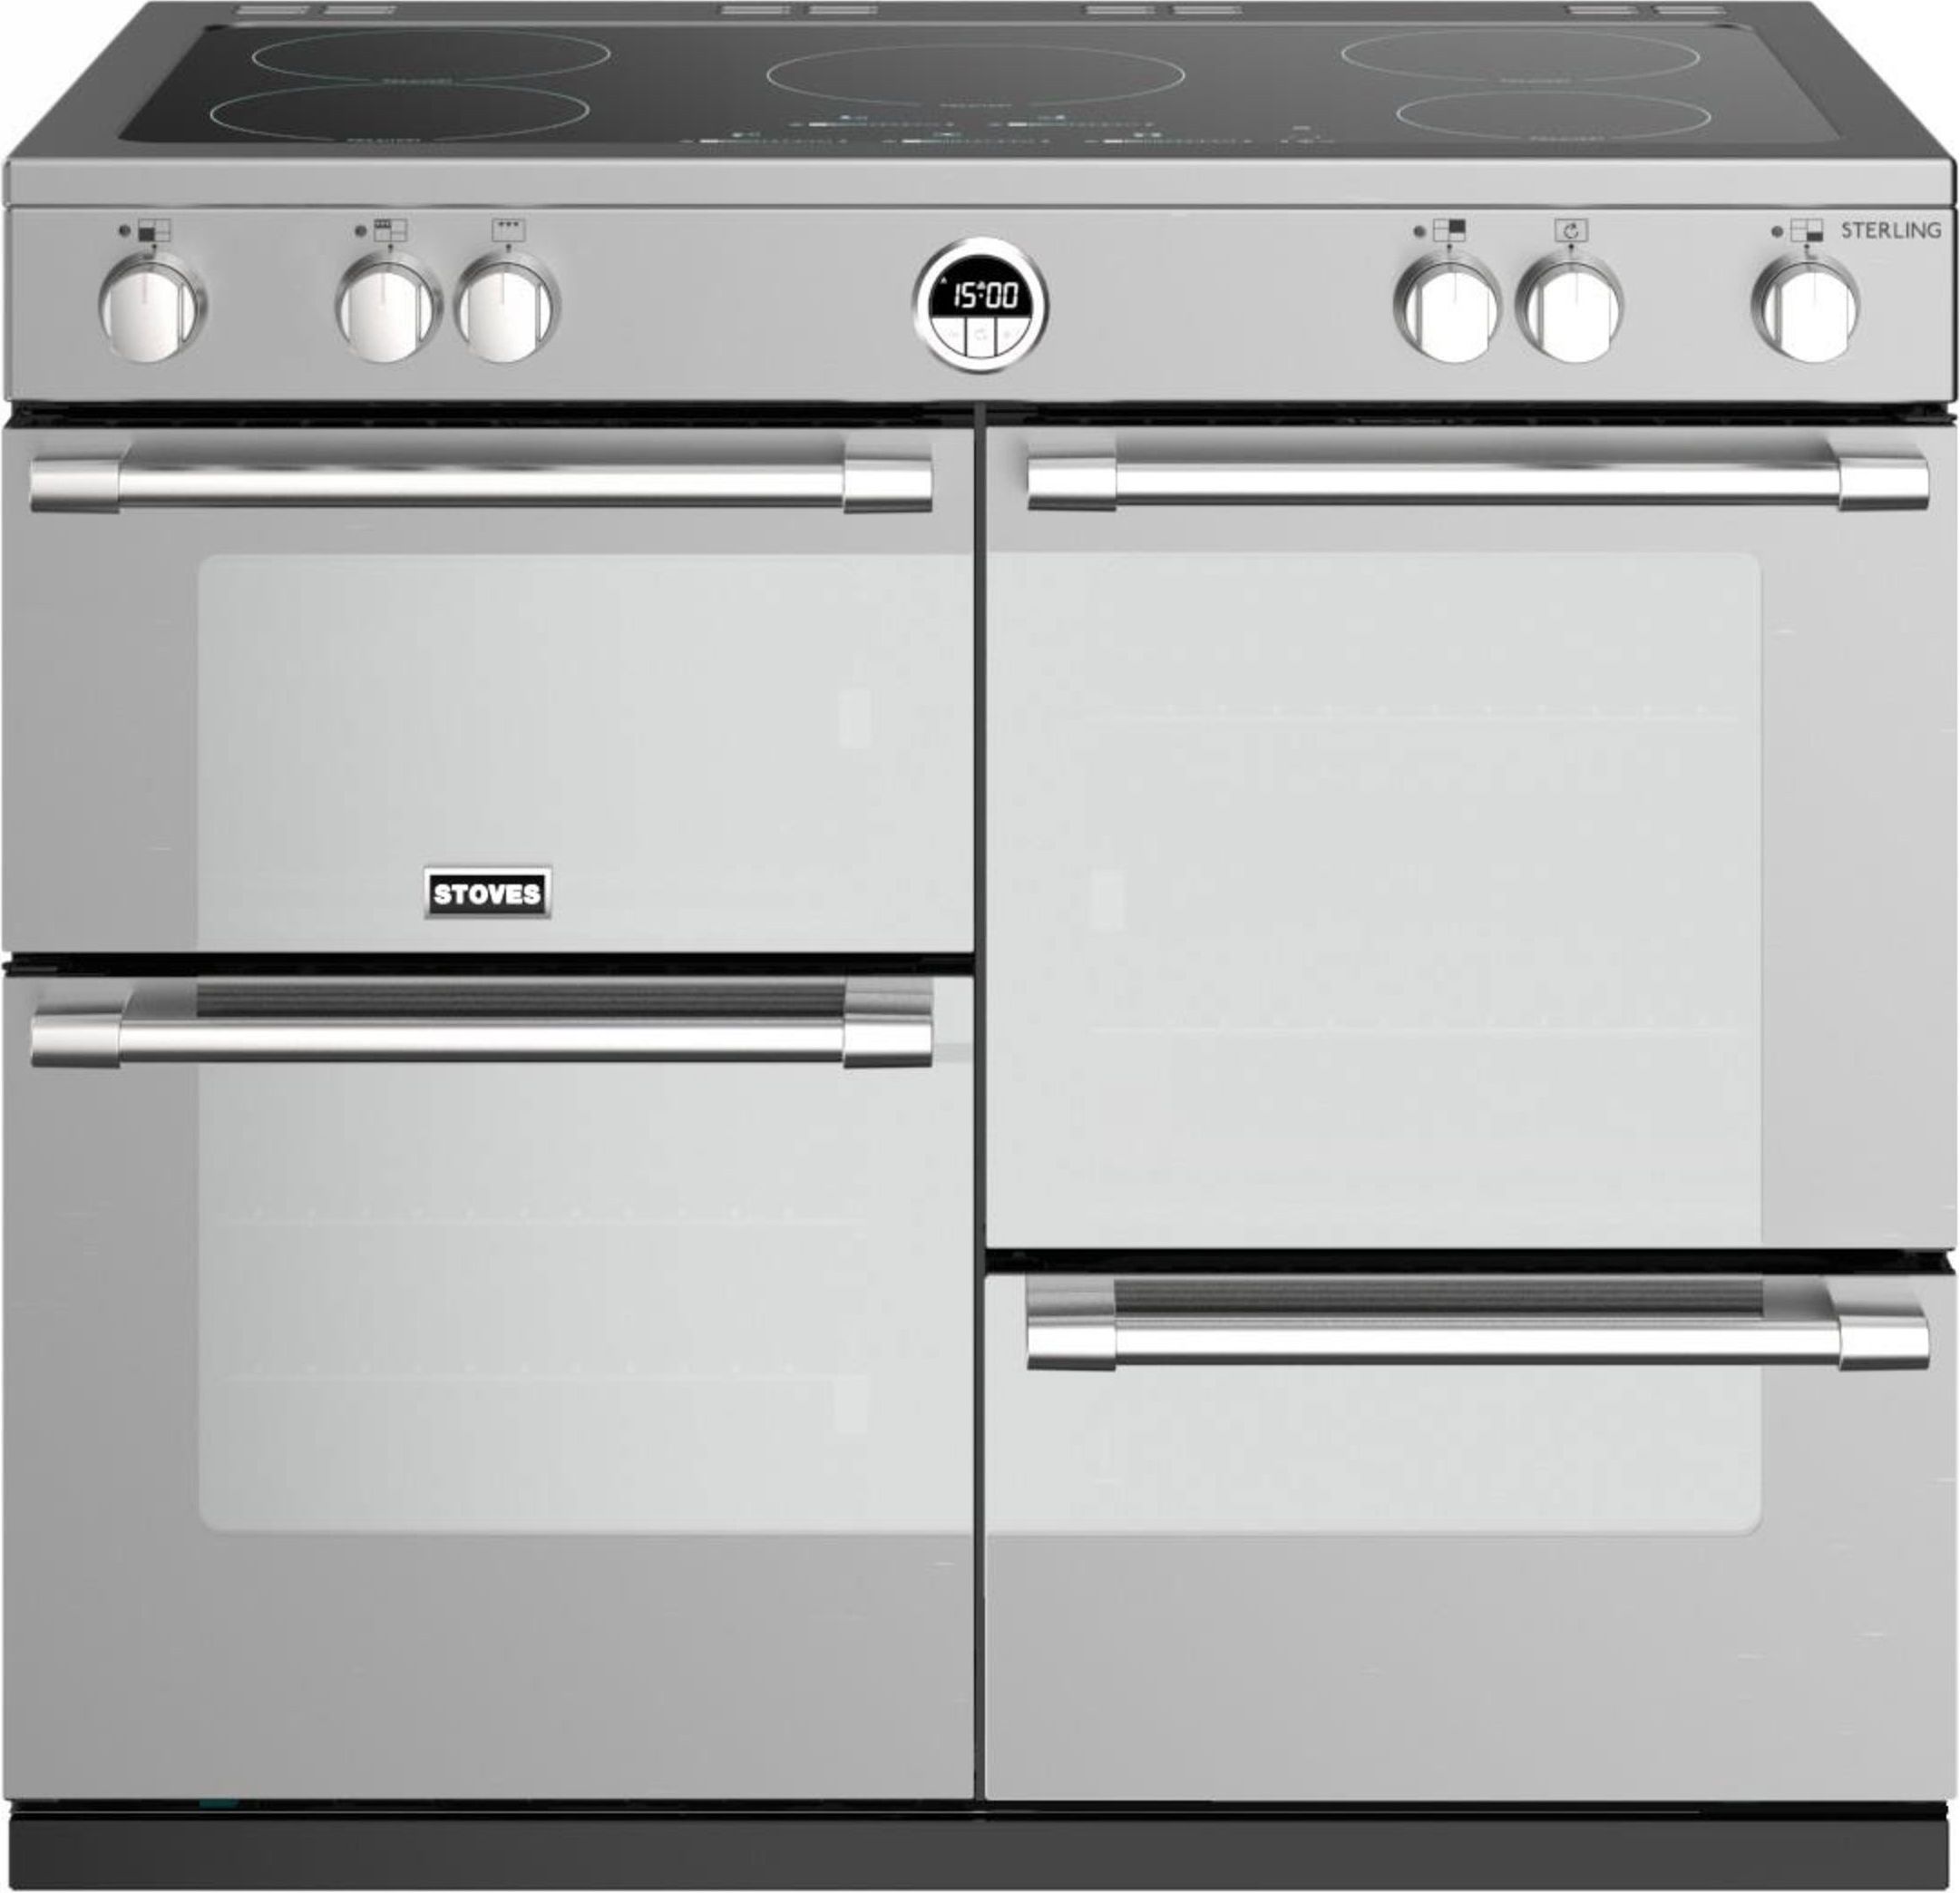 Stoves Sterling ST STER S1000Ei MK22 SS 100cm Electric Range Cooker with Induction Hob - Stainless Steel - A Rated, Stainless Steel